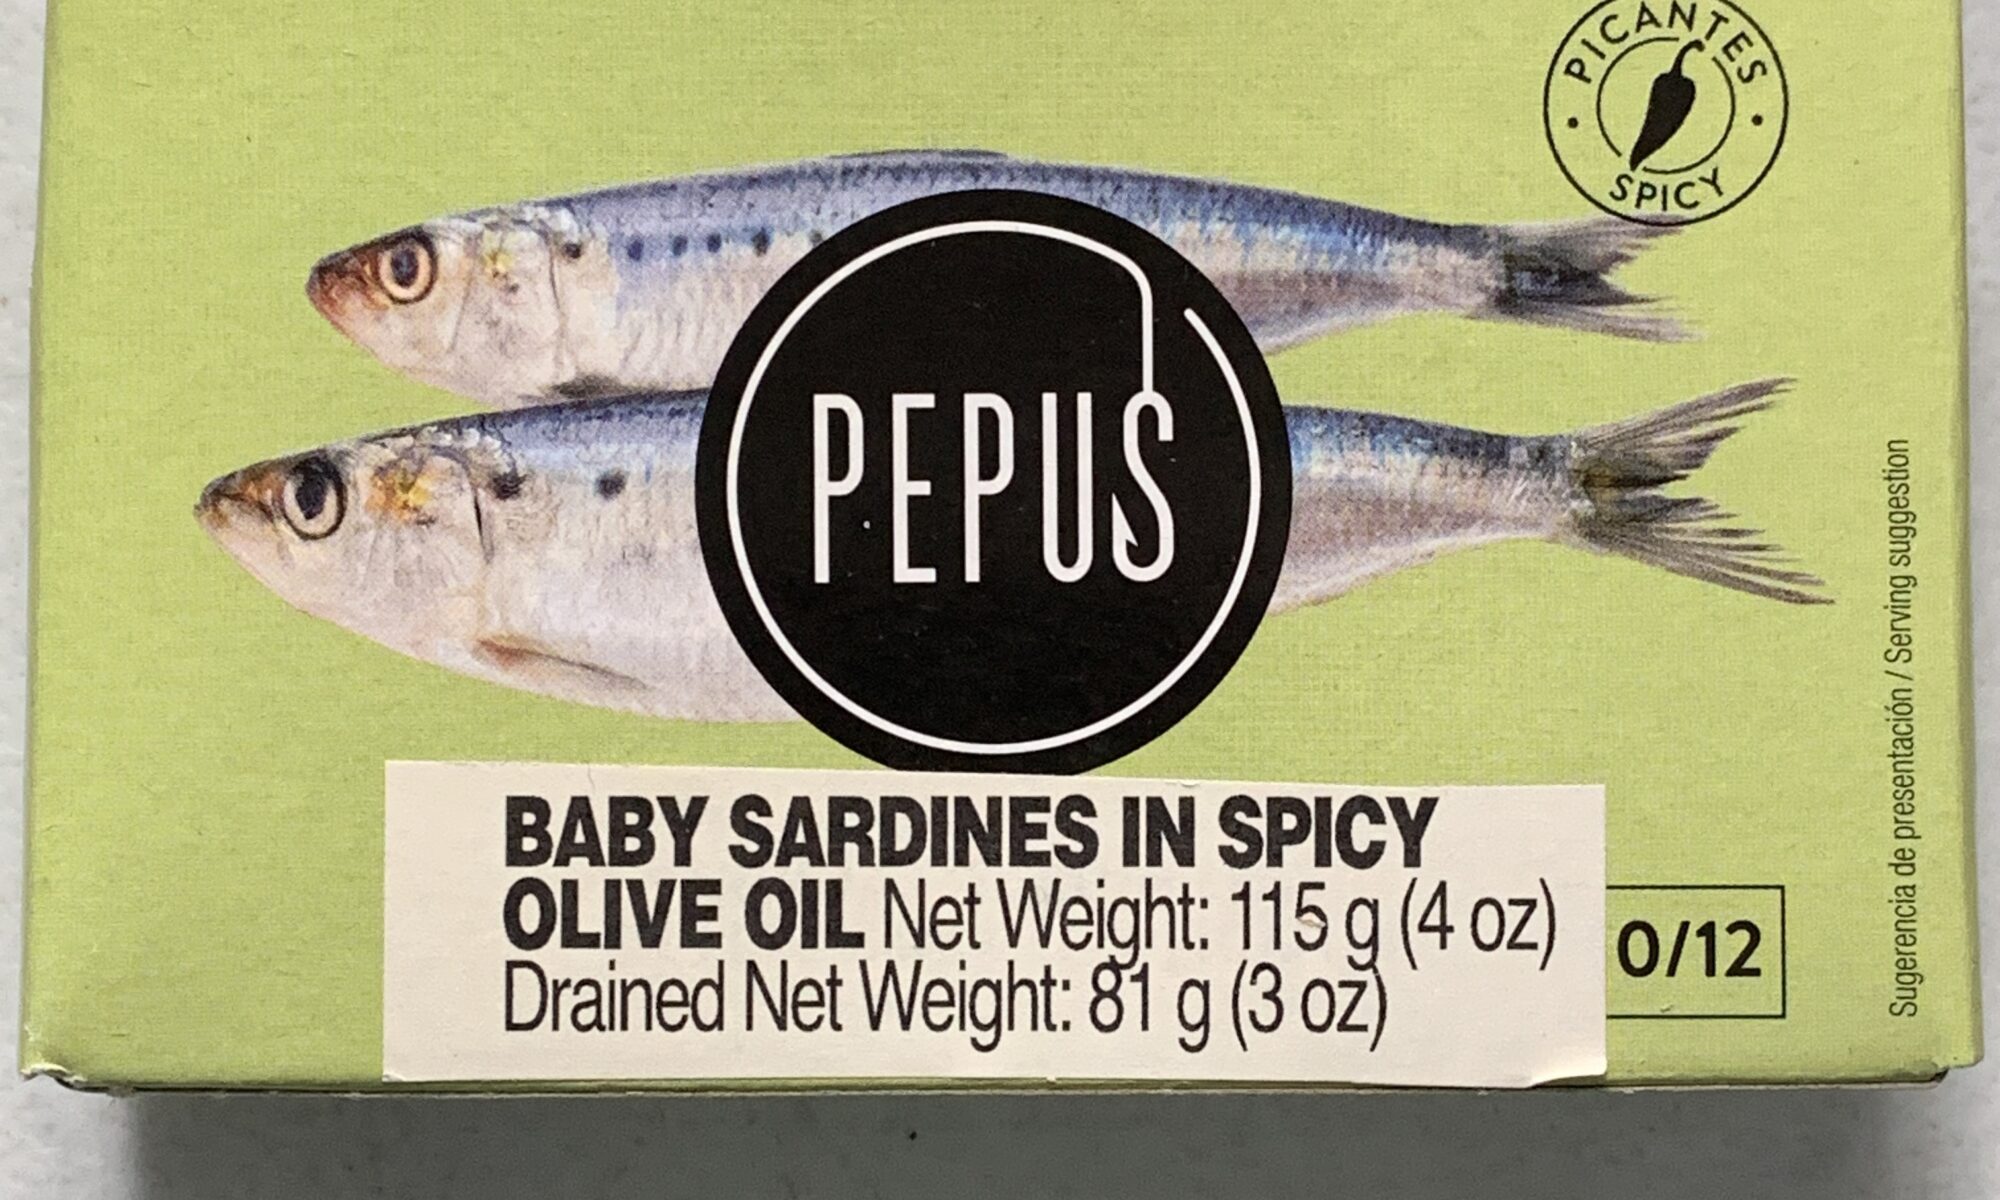 Image of the front of a package of Pepus Baby Sardines in Spicy Olive Oil